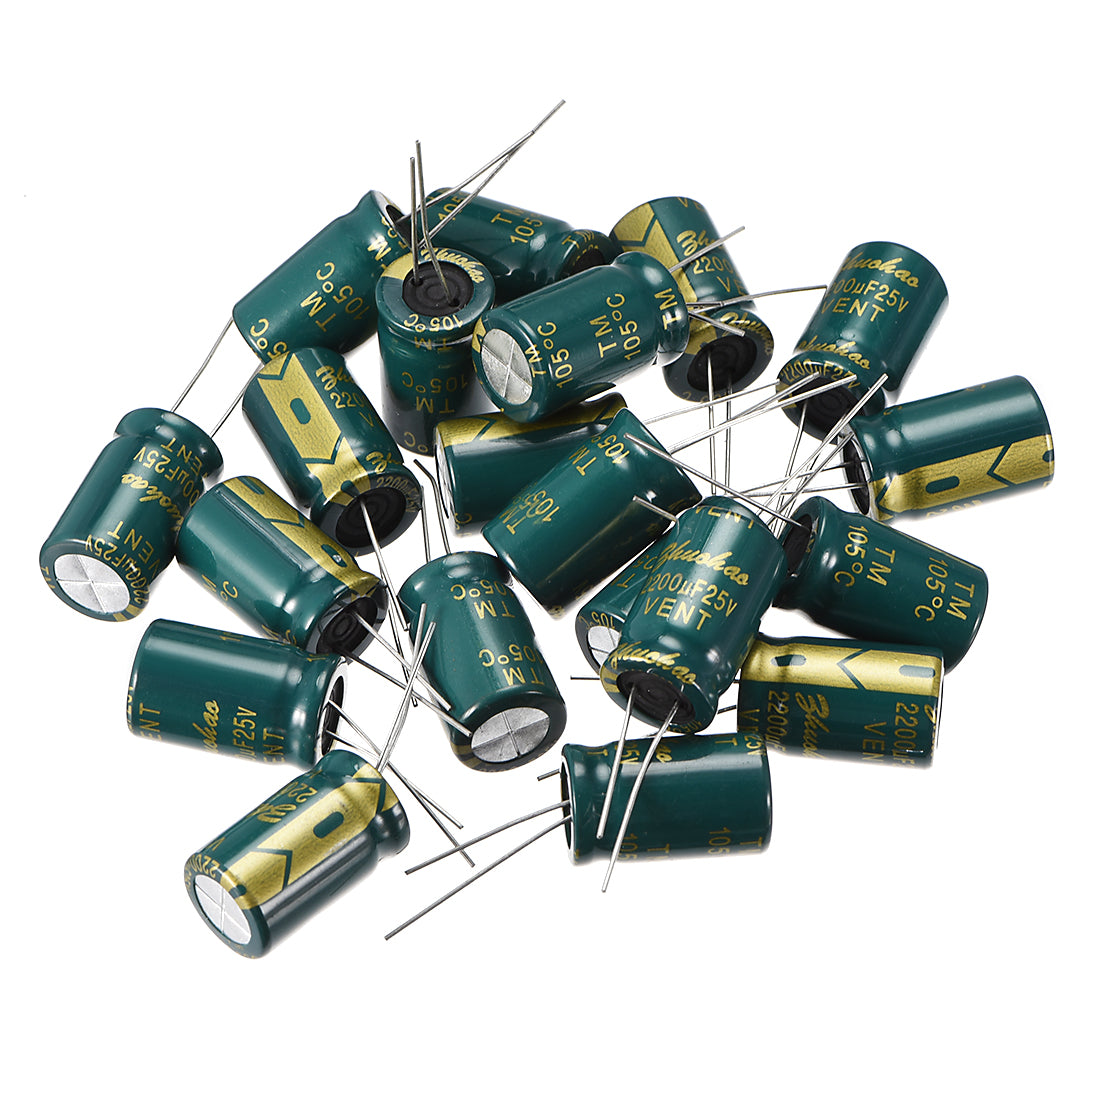 uxcell Uxcell Aluminum Radial Electrolytic Capacitor Low ESR Green with 2200UF 25V 105 Celsius Life 3000H 13 x 21 mm High Ripple Current,Low Impedance 20pcs